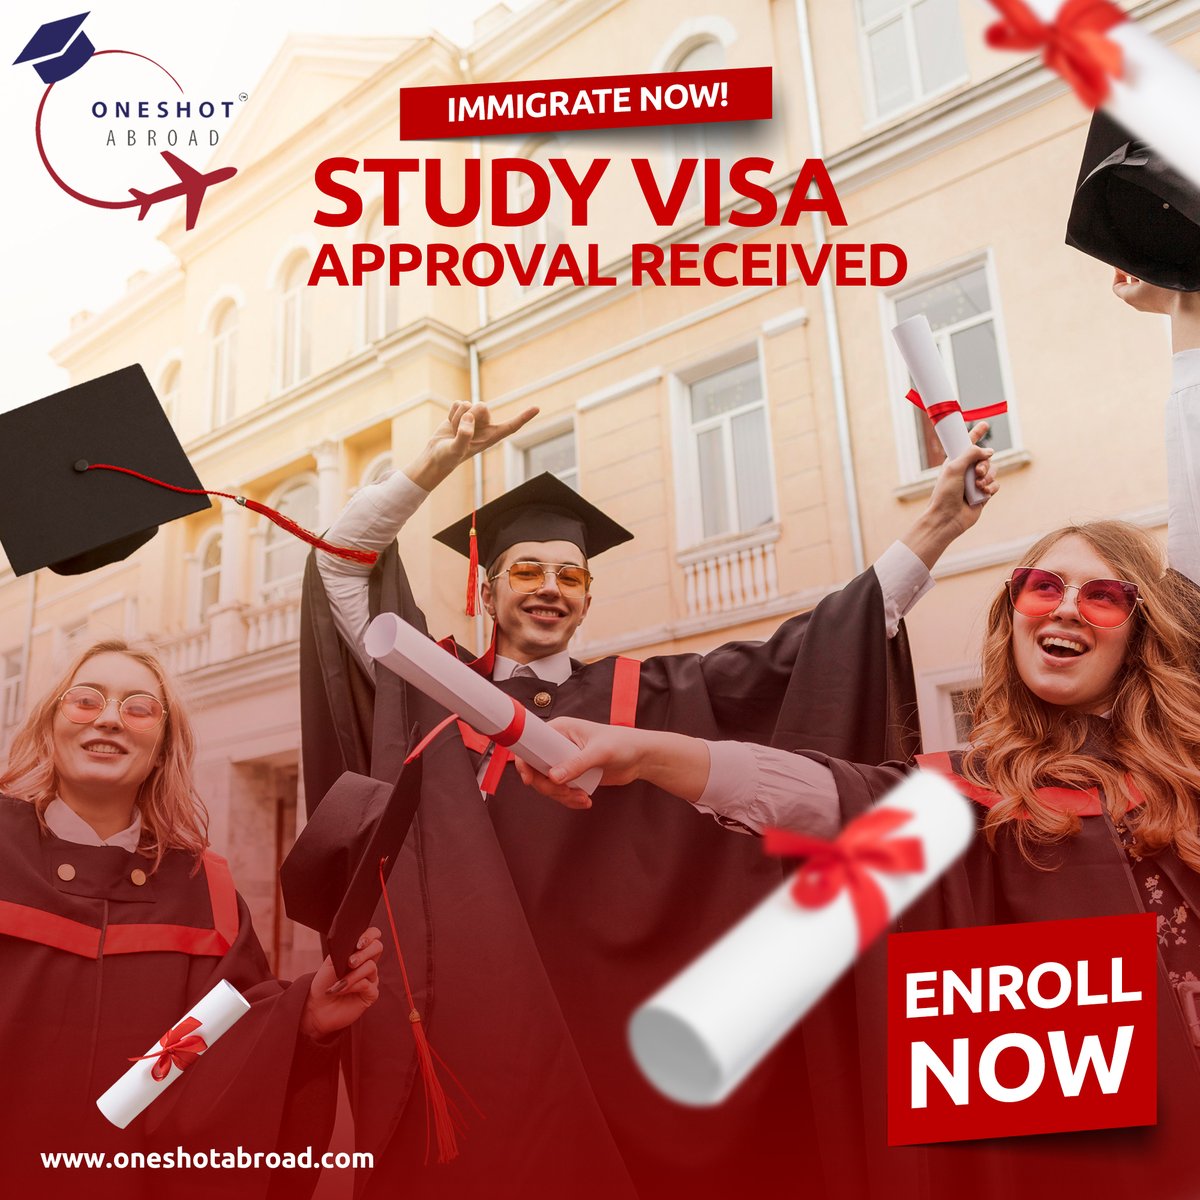 Study Visa Approval Received!
Immigrate with us!
Enroll Now @oneshotabroad 
.
.
.
.
.
#studyincanada #studyinuk #studyinusa #studyabroad #expertcounsellor #expertcounselling #studyabroadconsultants #education